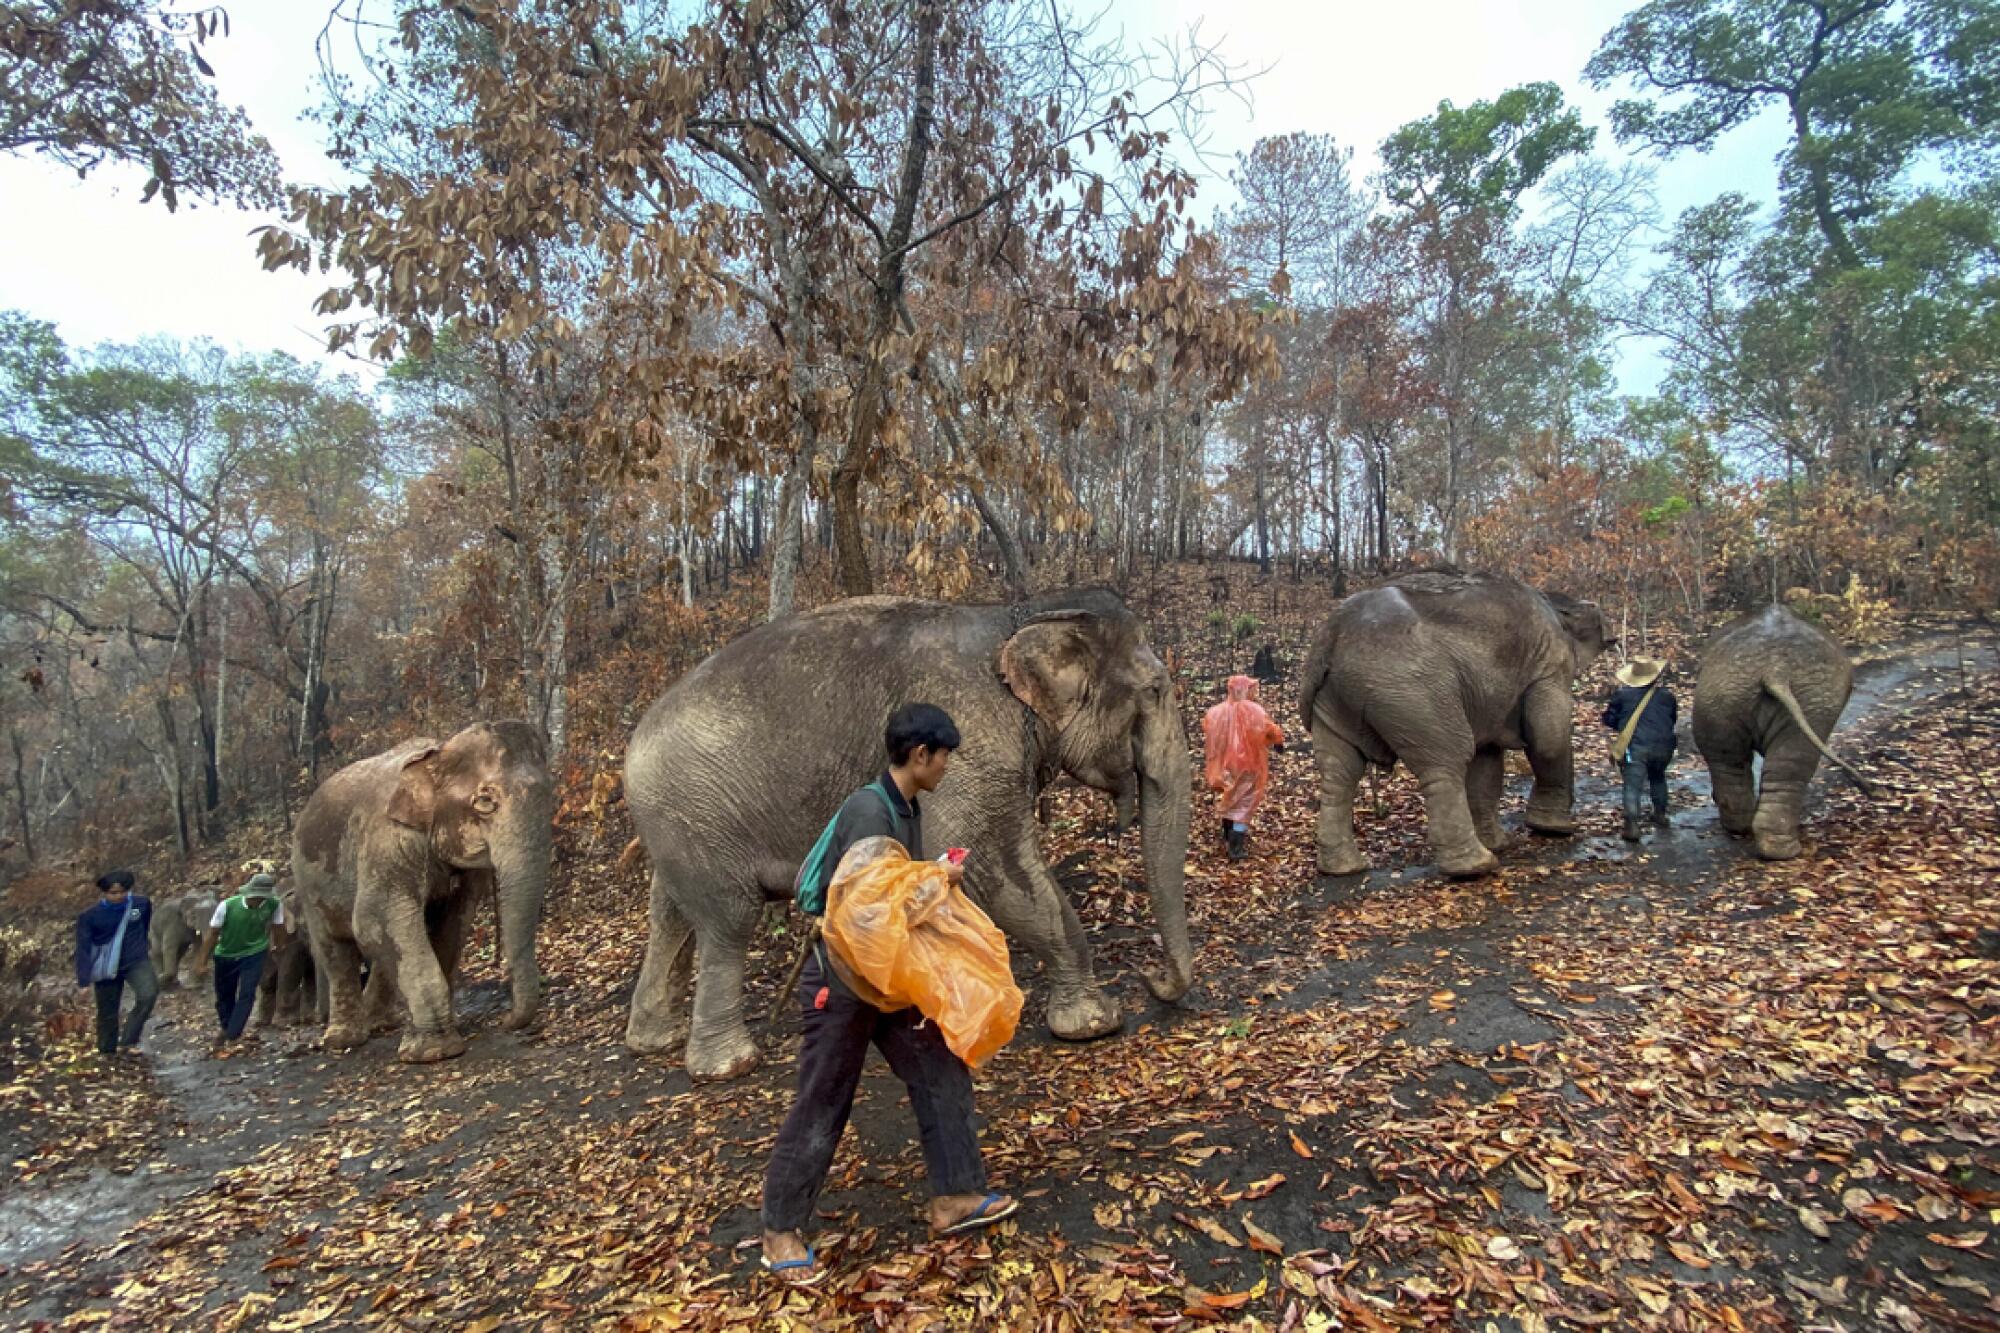 More than 100 elephants in Thailand have marched to their homeland of Mae Chaem since last month.